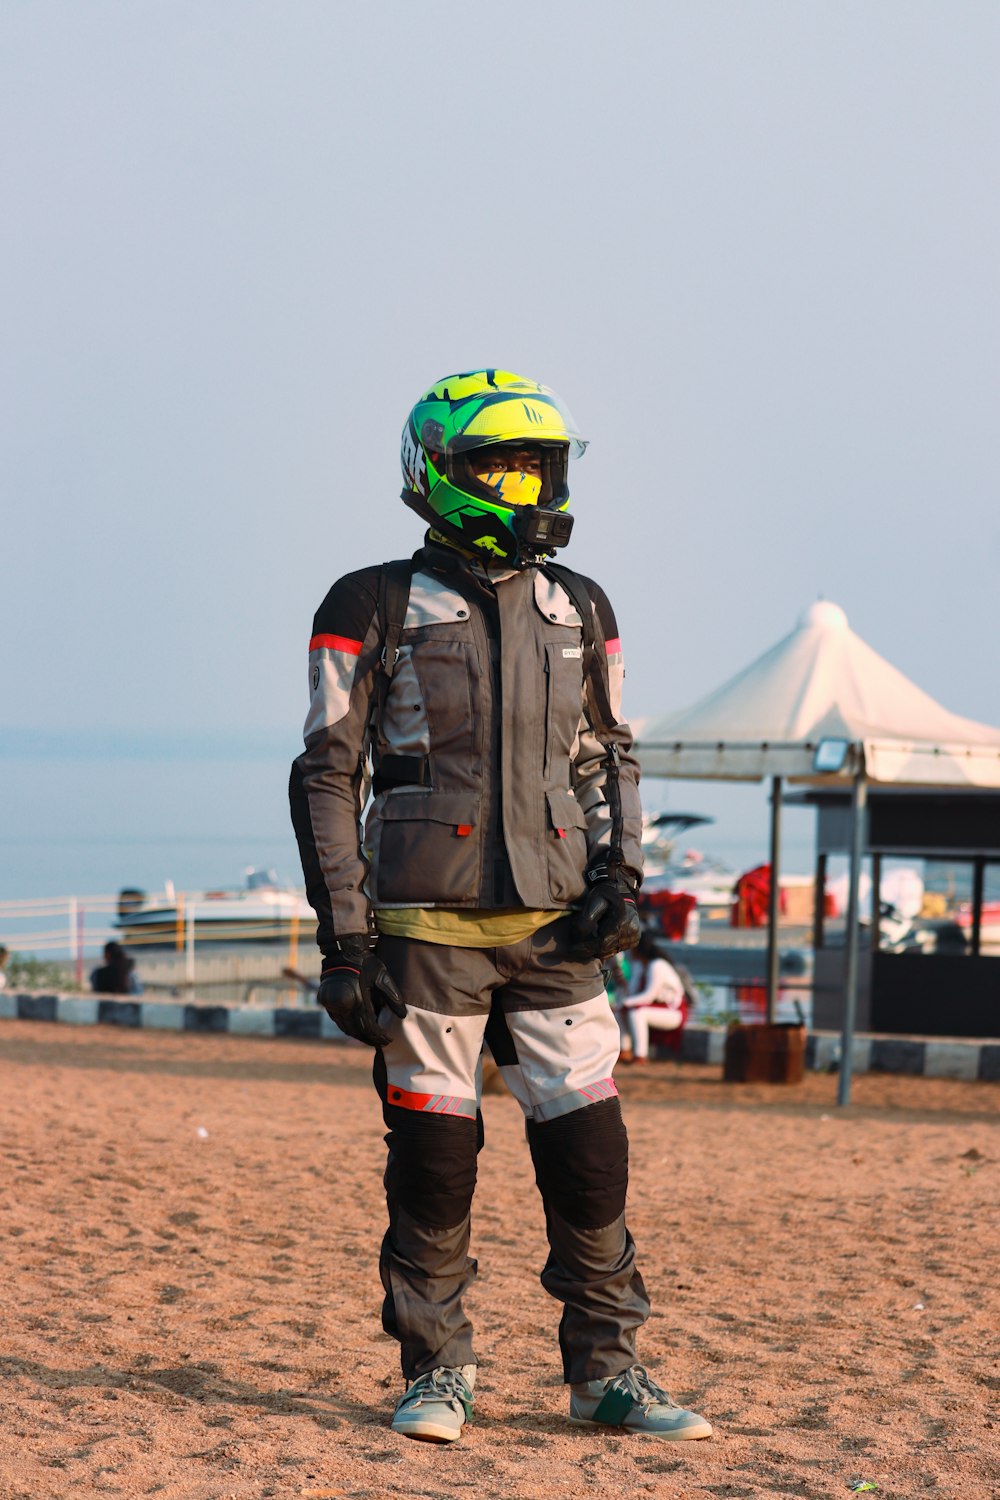 a person wearing a helmet and protective gear